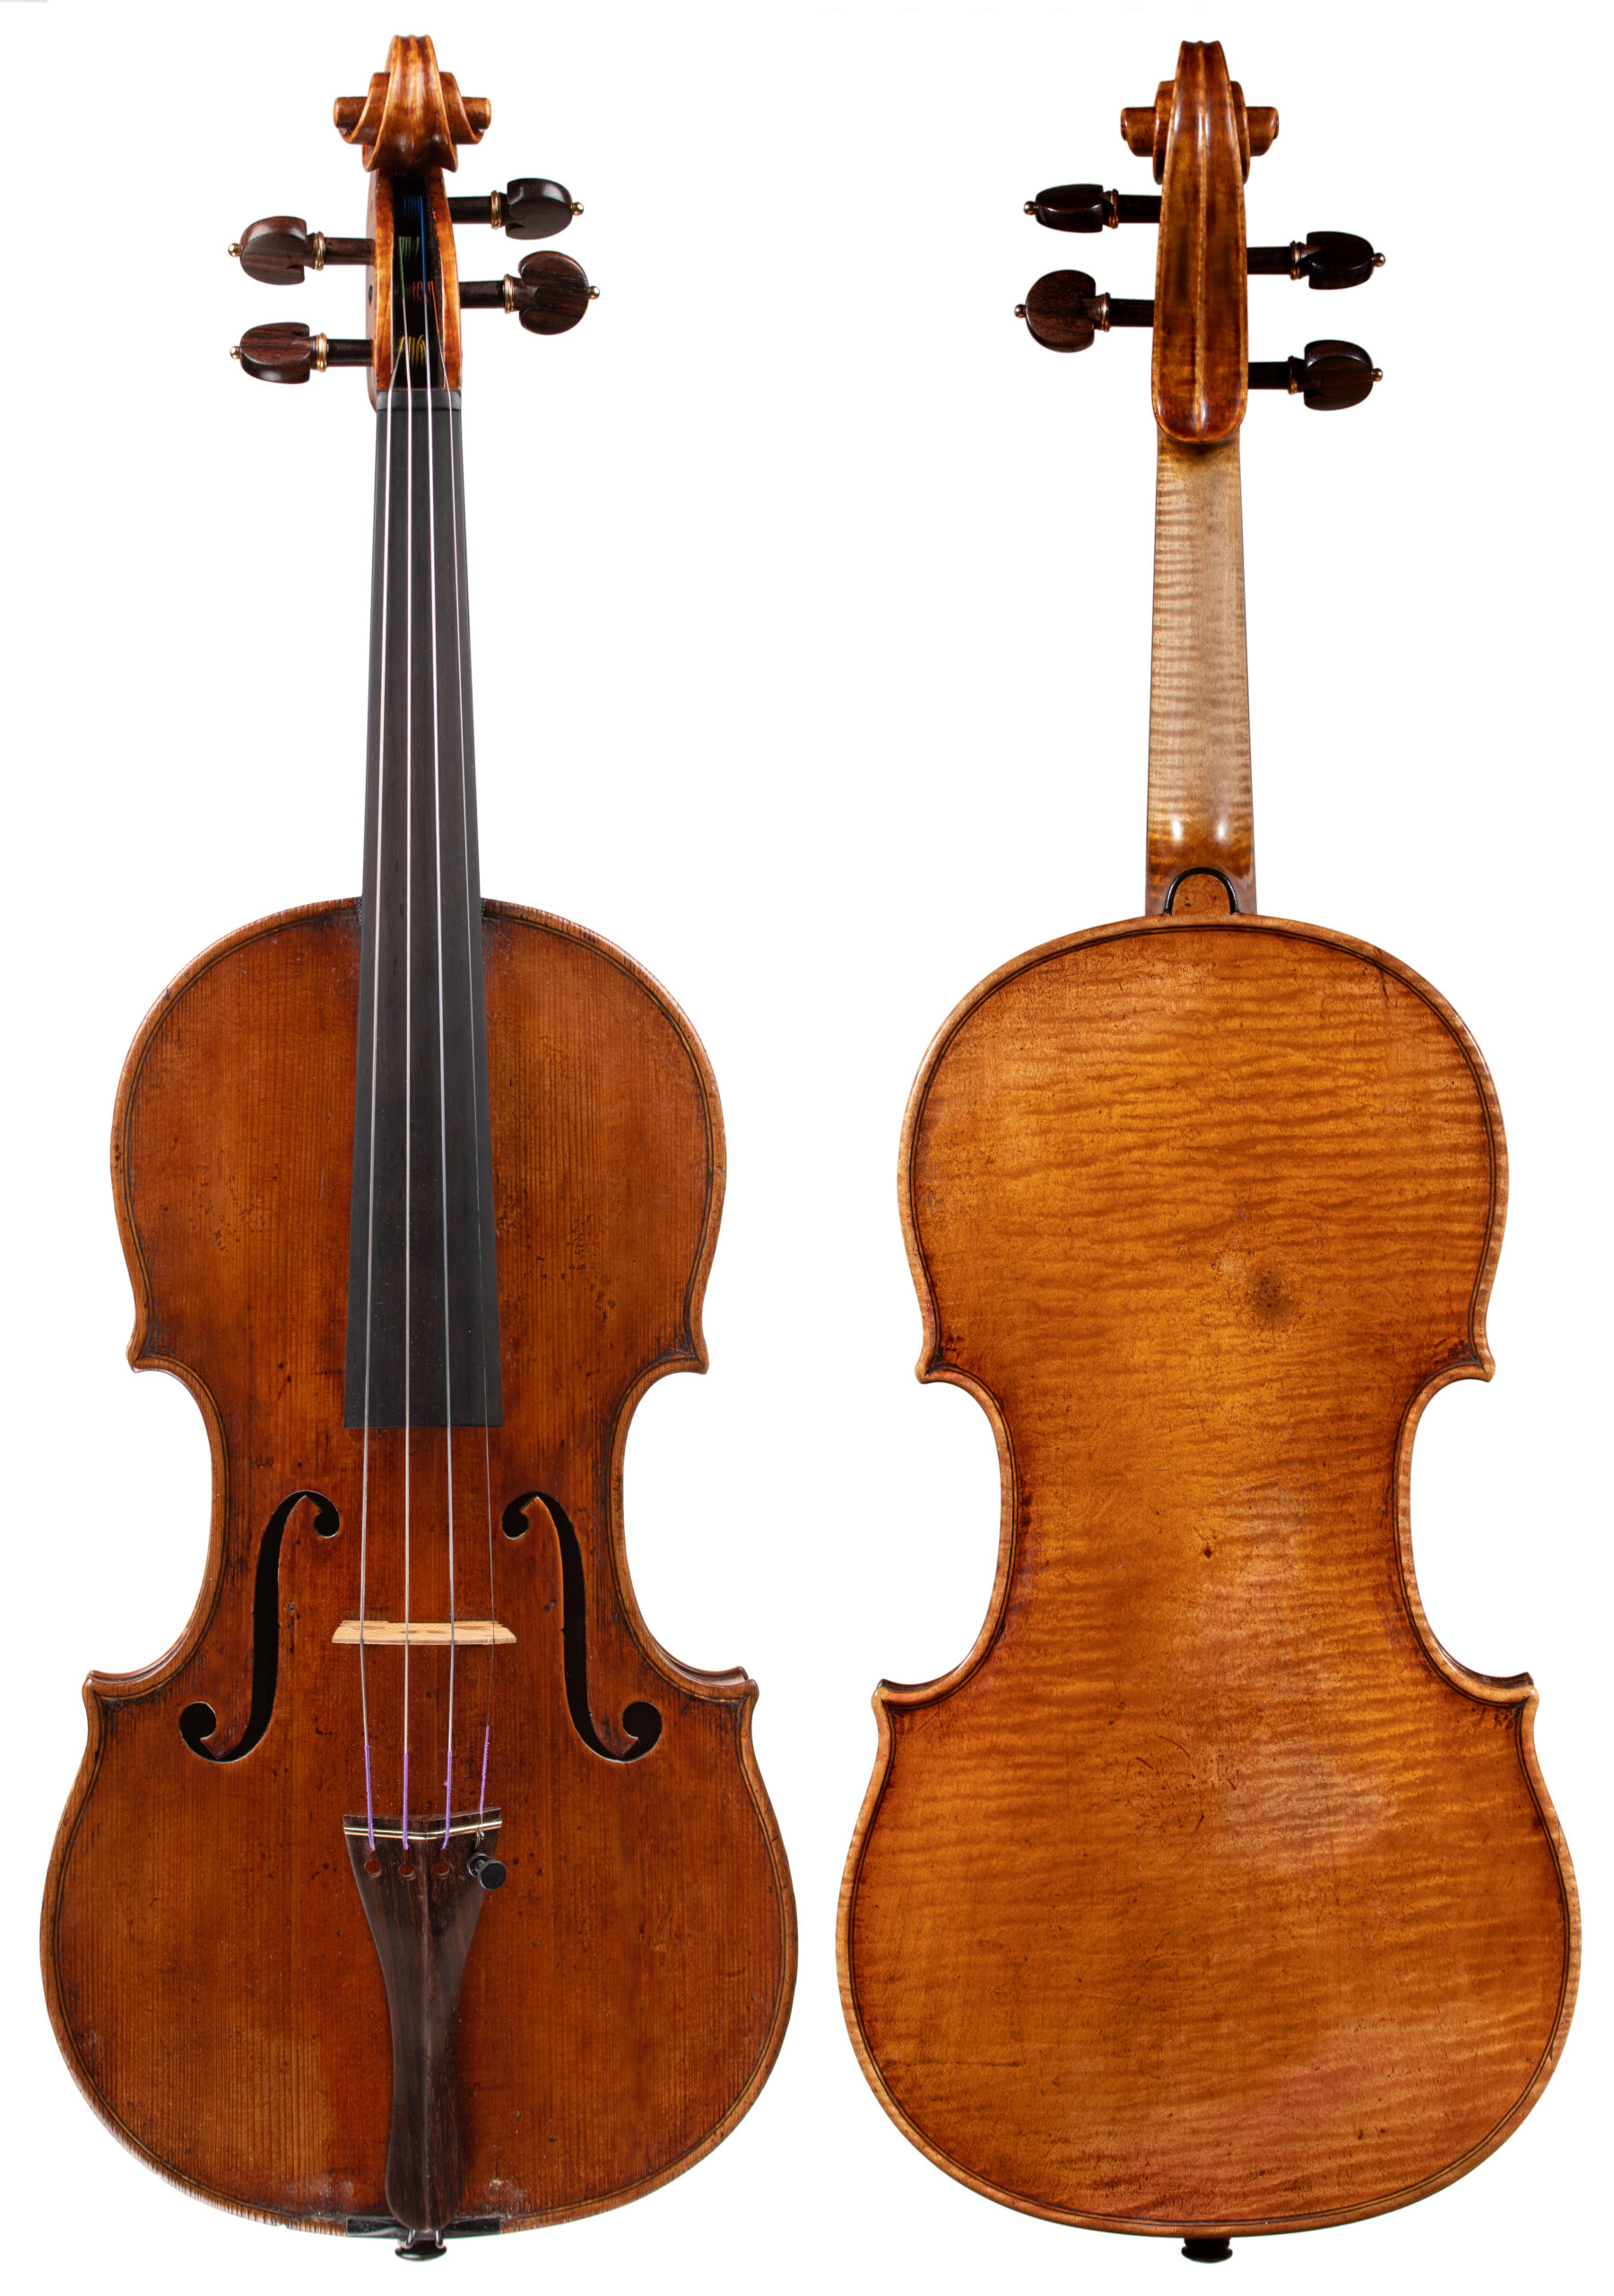 forhandler de deltager French violin labeled Joannes Gagliano, 1801 - William Harris Lee & Company